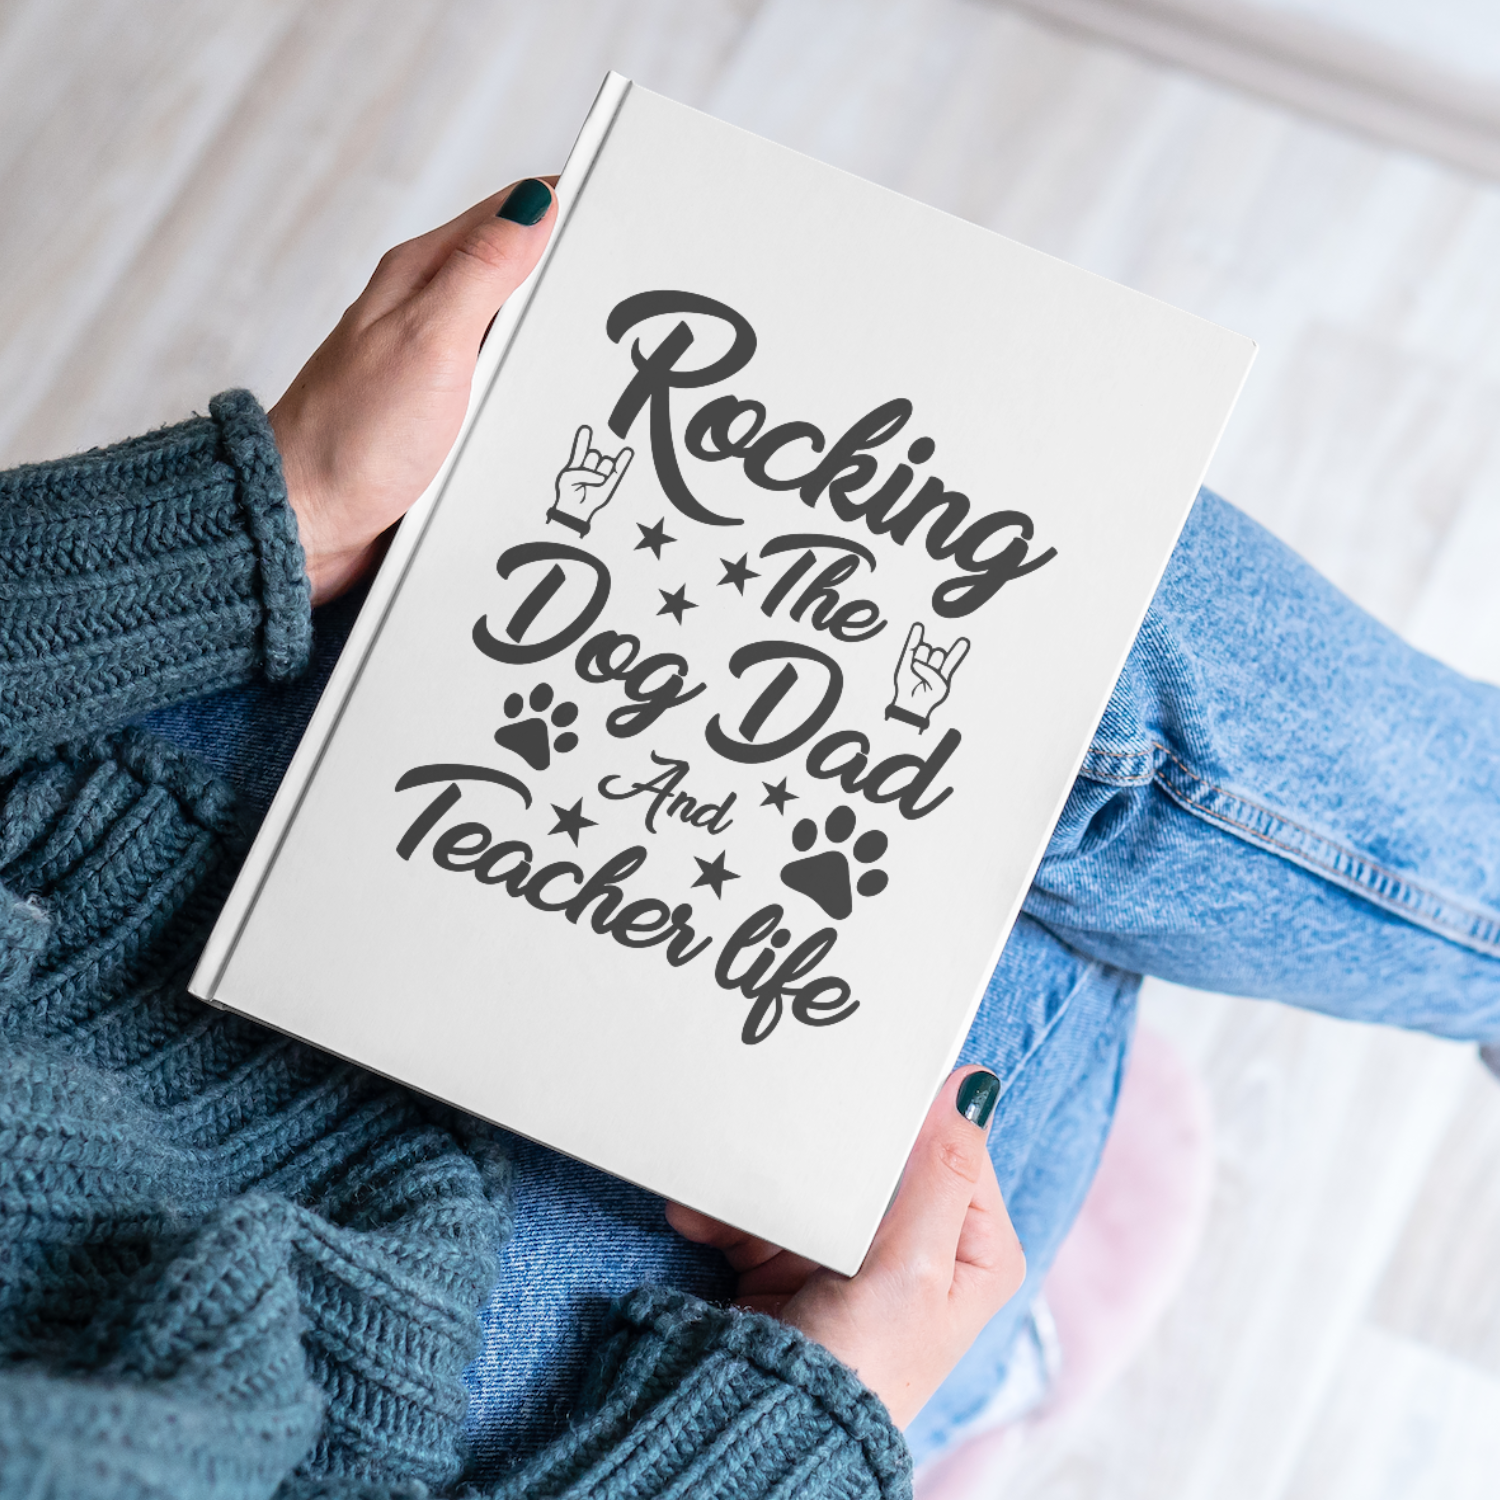 Rocking the dog dad and teacher life SVG | Digital Download | Cut File | SVG - Only The Sweet Stuff